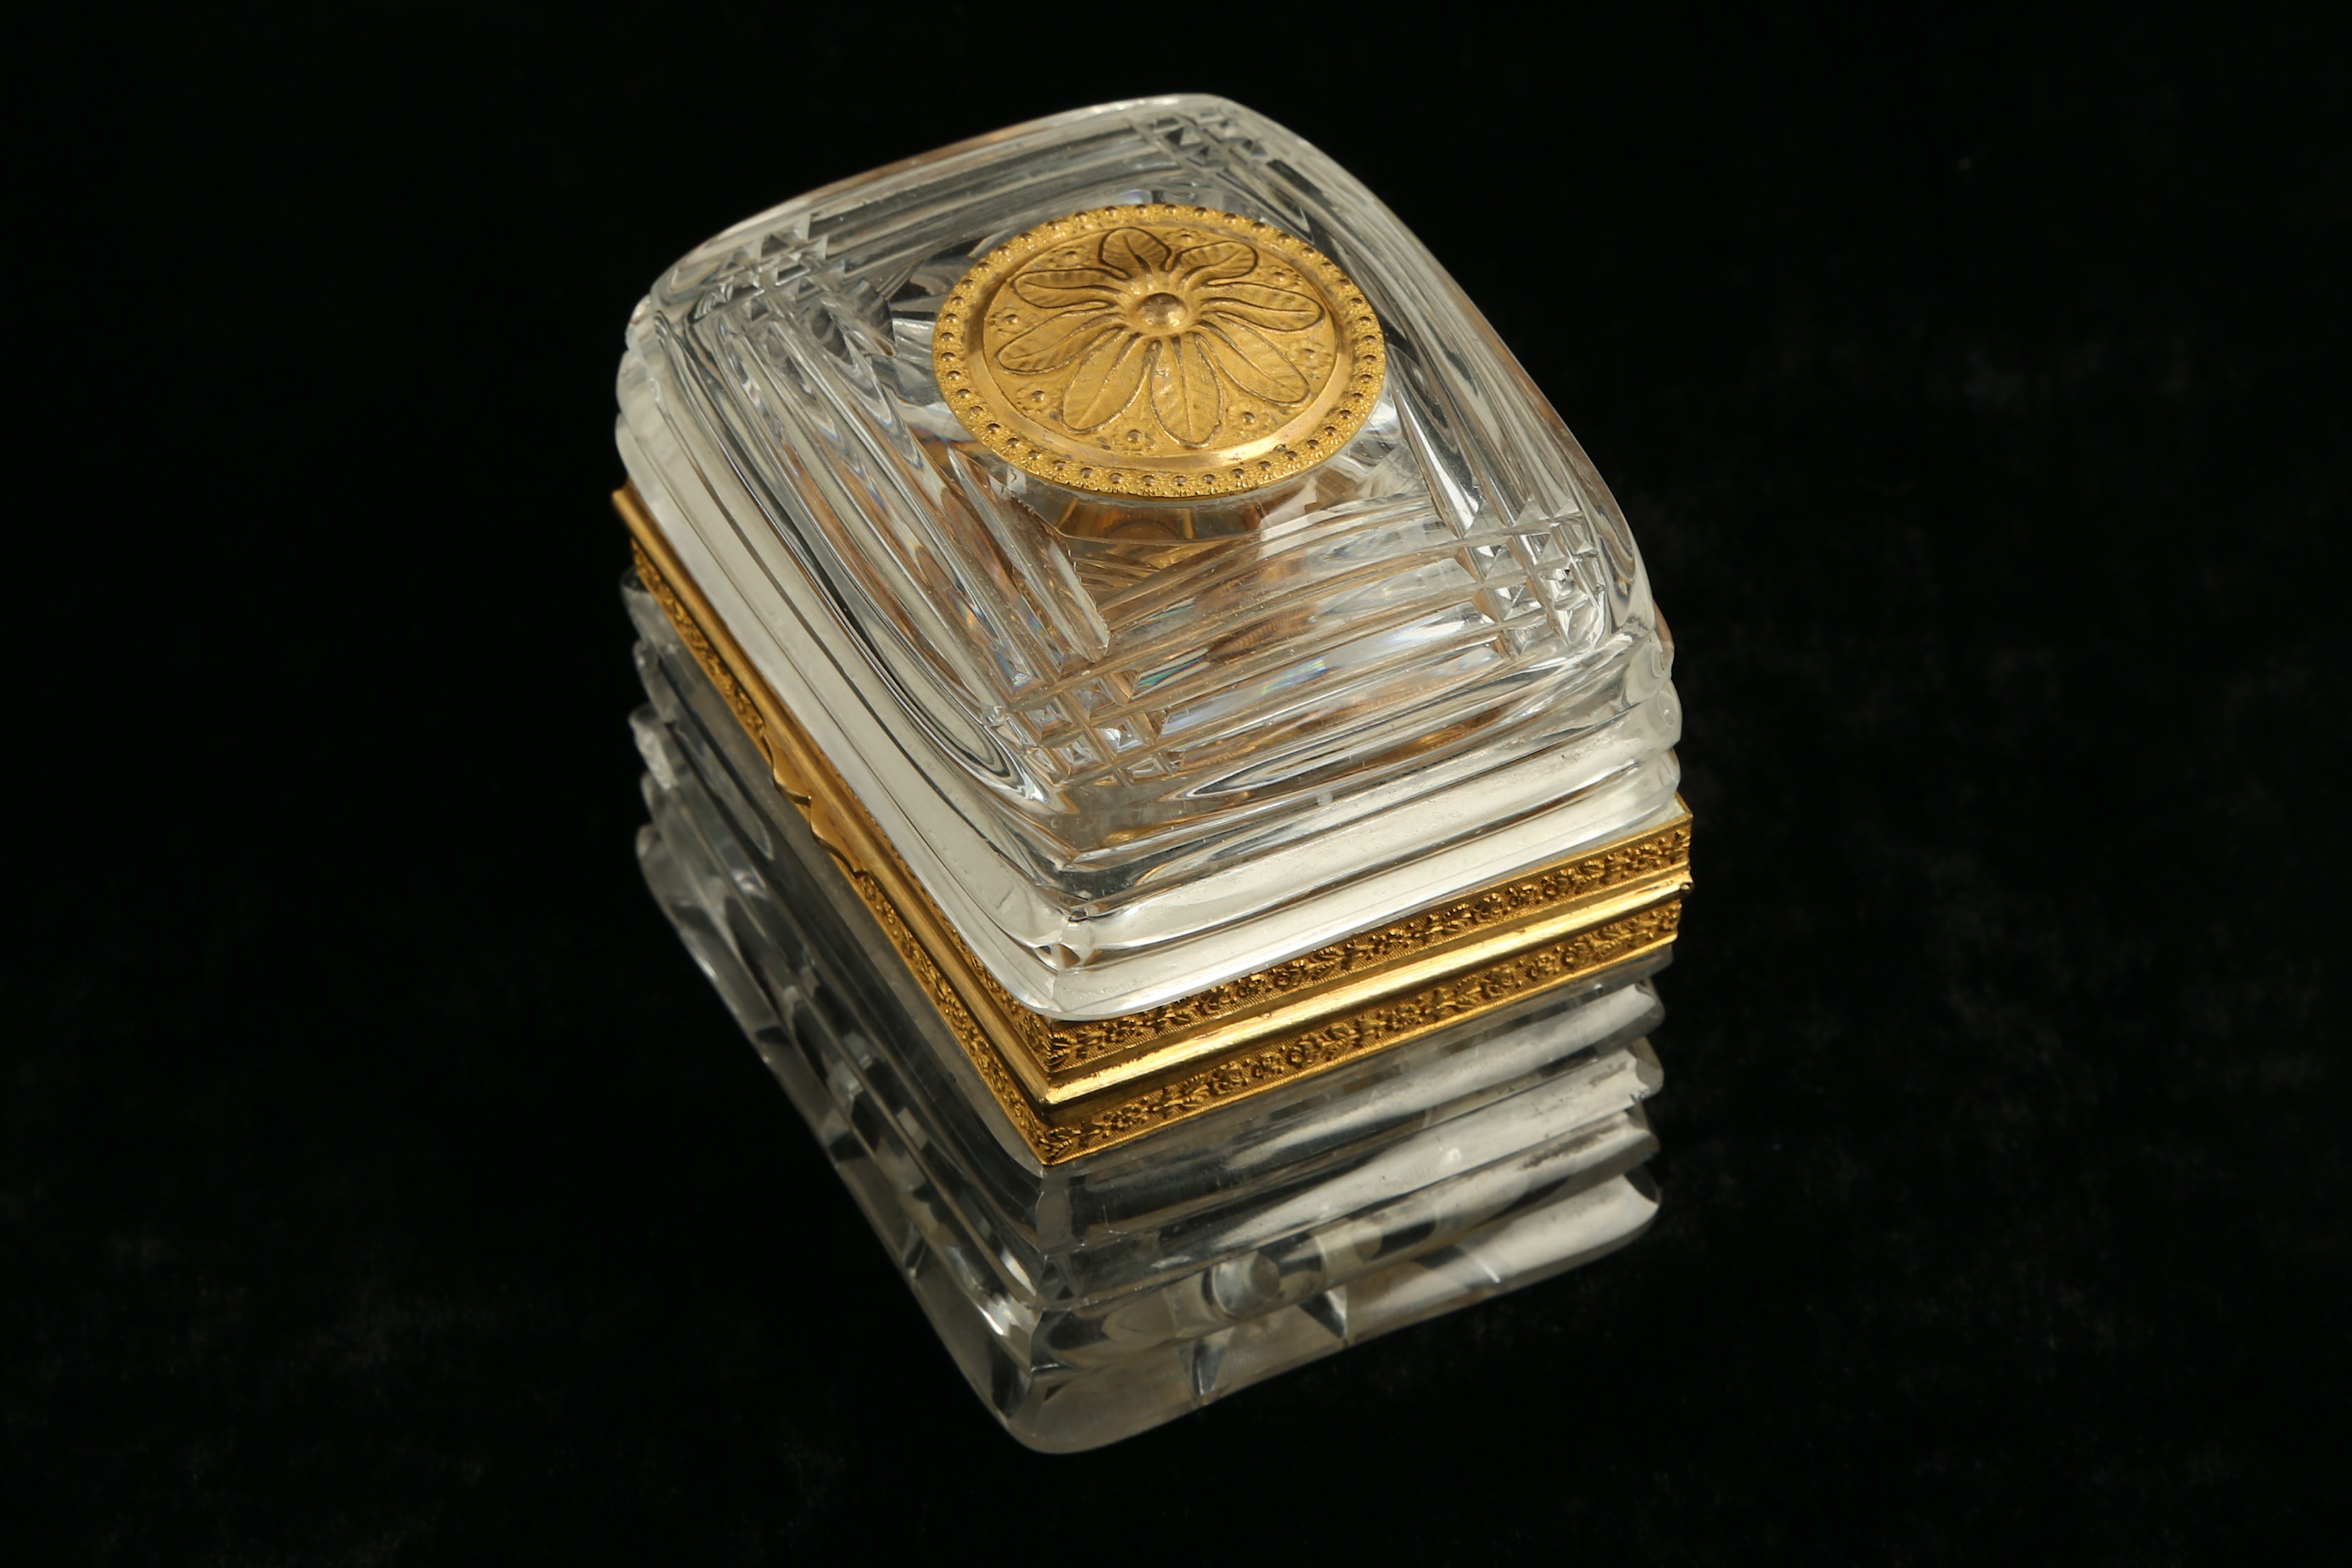 A 19th Century French Palais-Royal gilt bronze mounted glass perfume casket, circa 1830s, in the - Image 4 of 6